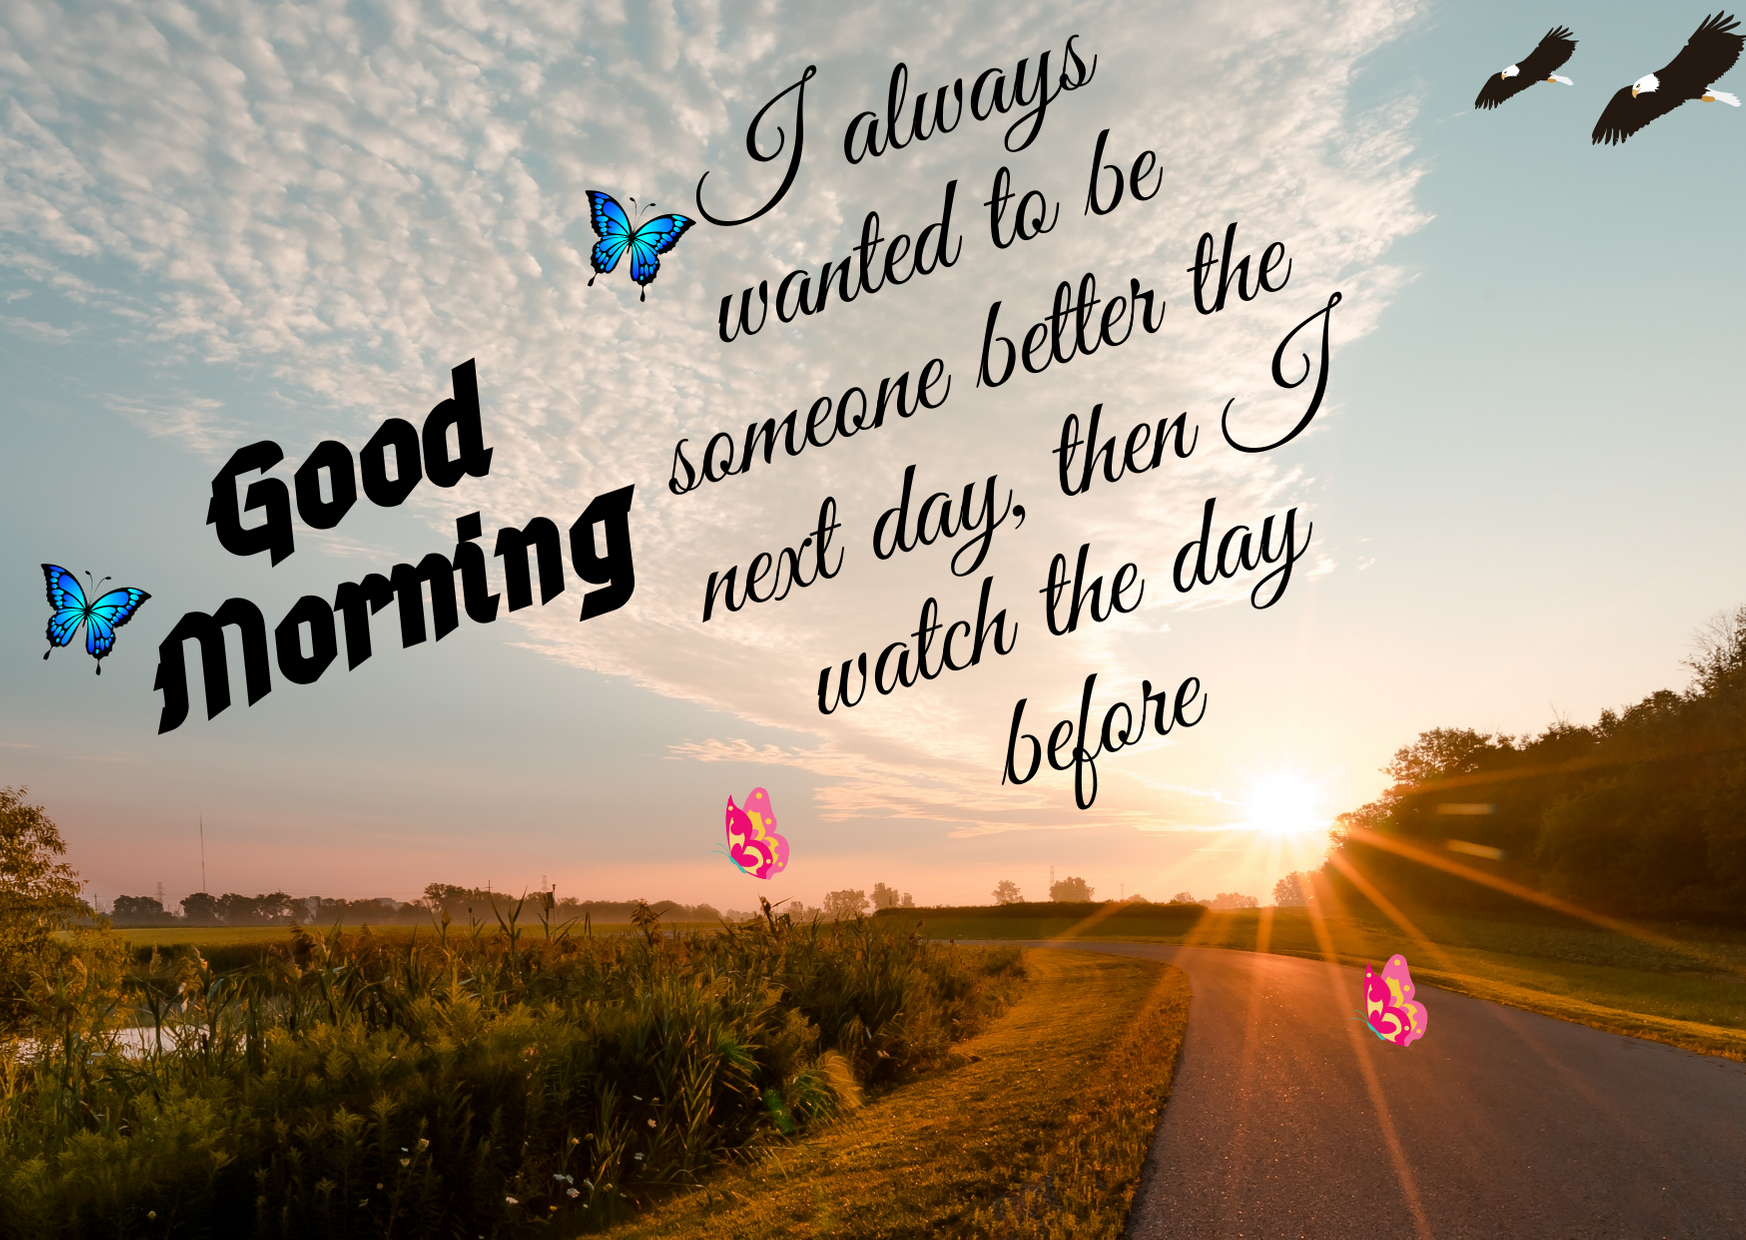 Best Good Morning HD Images for whatsaap free download, Romantic Good Morning English Status, 100 whatsaap  Good Morning wishes HD photos, ansuin21.com